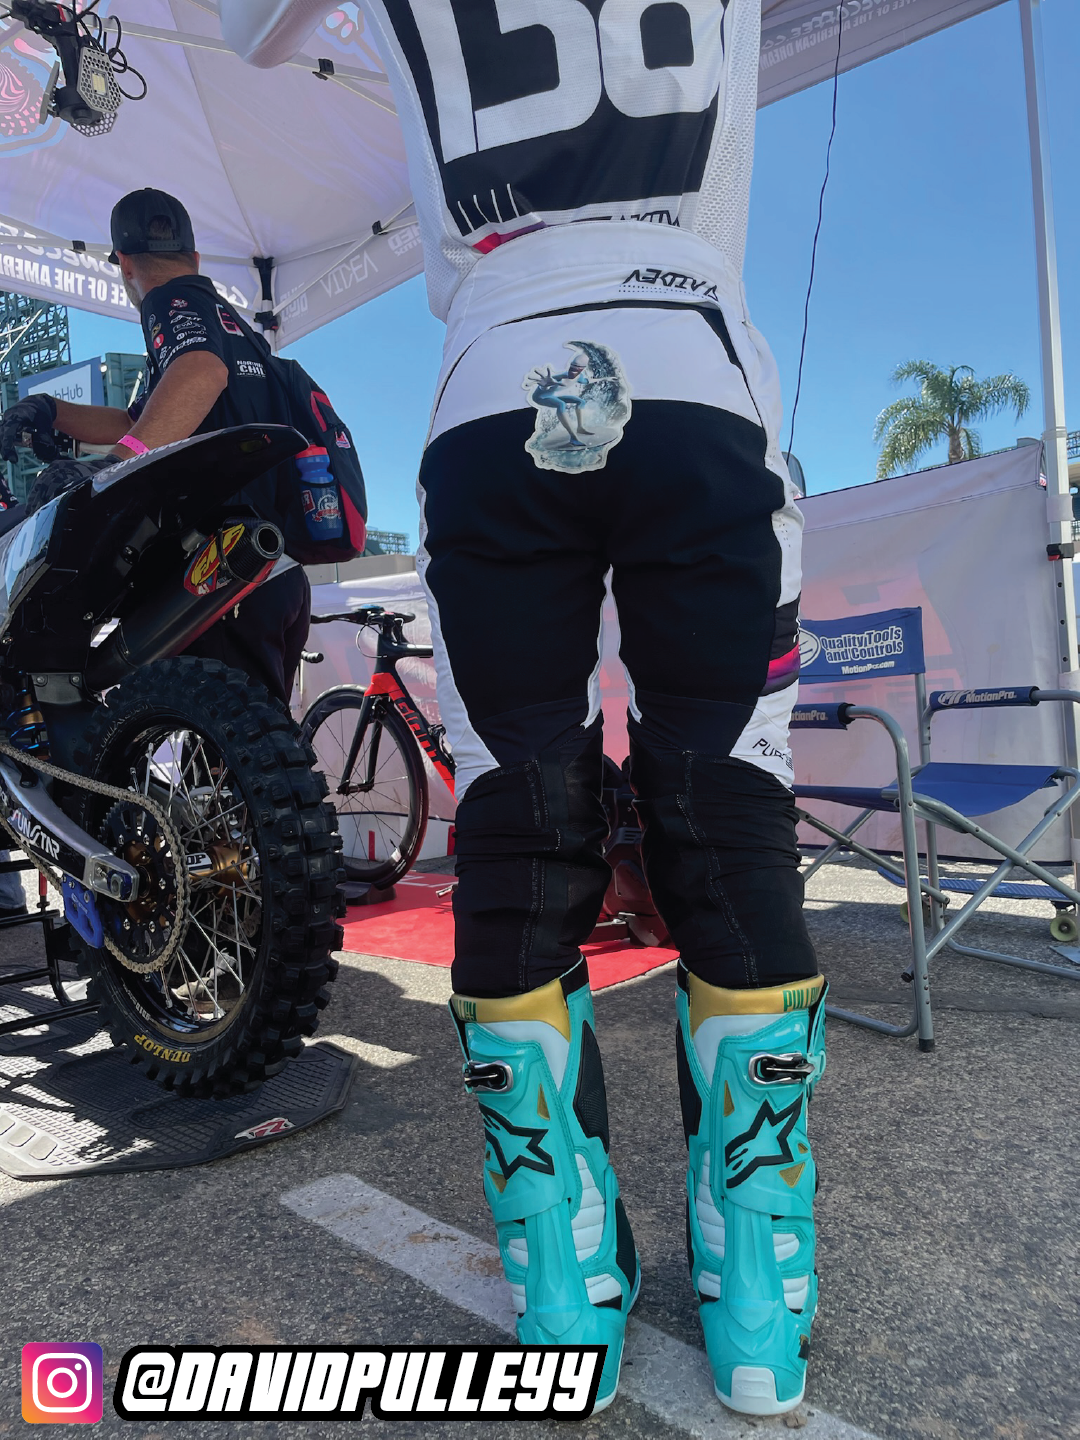 Is there patches for moto pants these things are almost new got burnt on  the header : r/Motocross